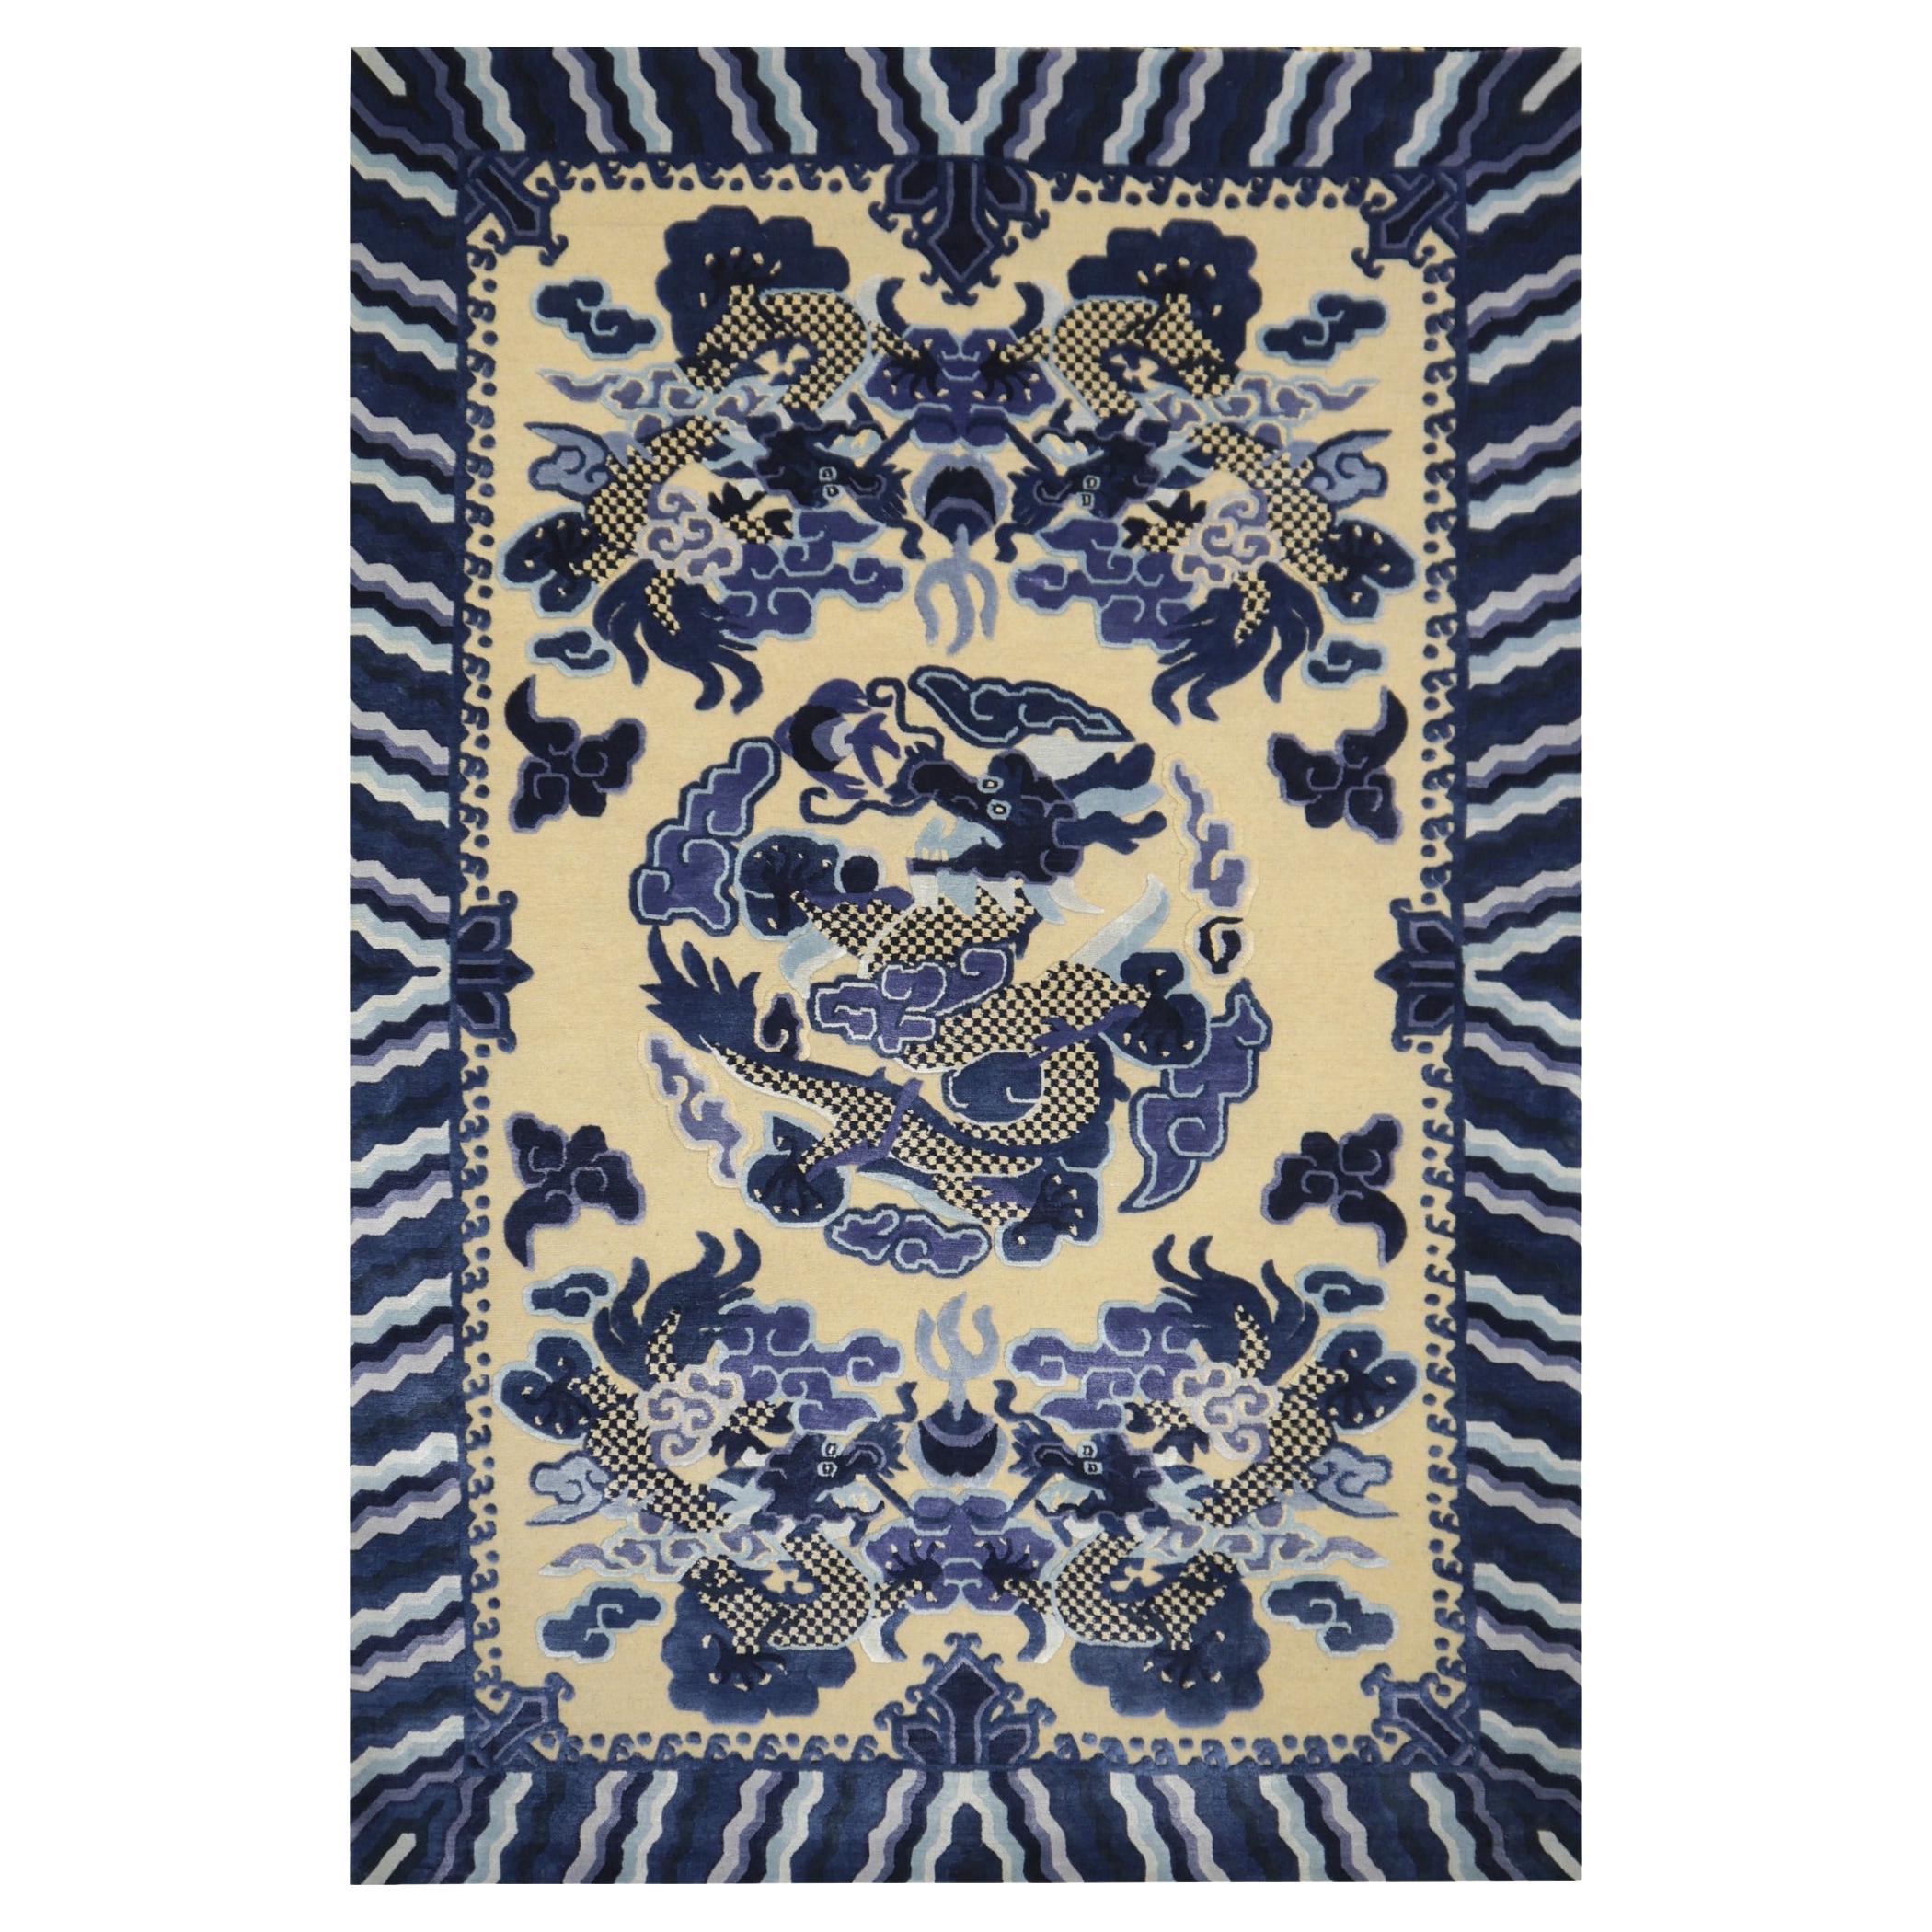 Dragon Design Rug Wool Silk Style of Chinese Imperial Kansu Carpet Blue Beige For Sale